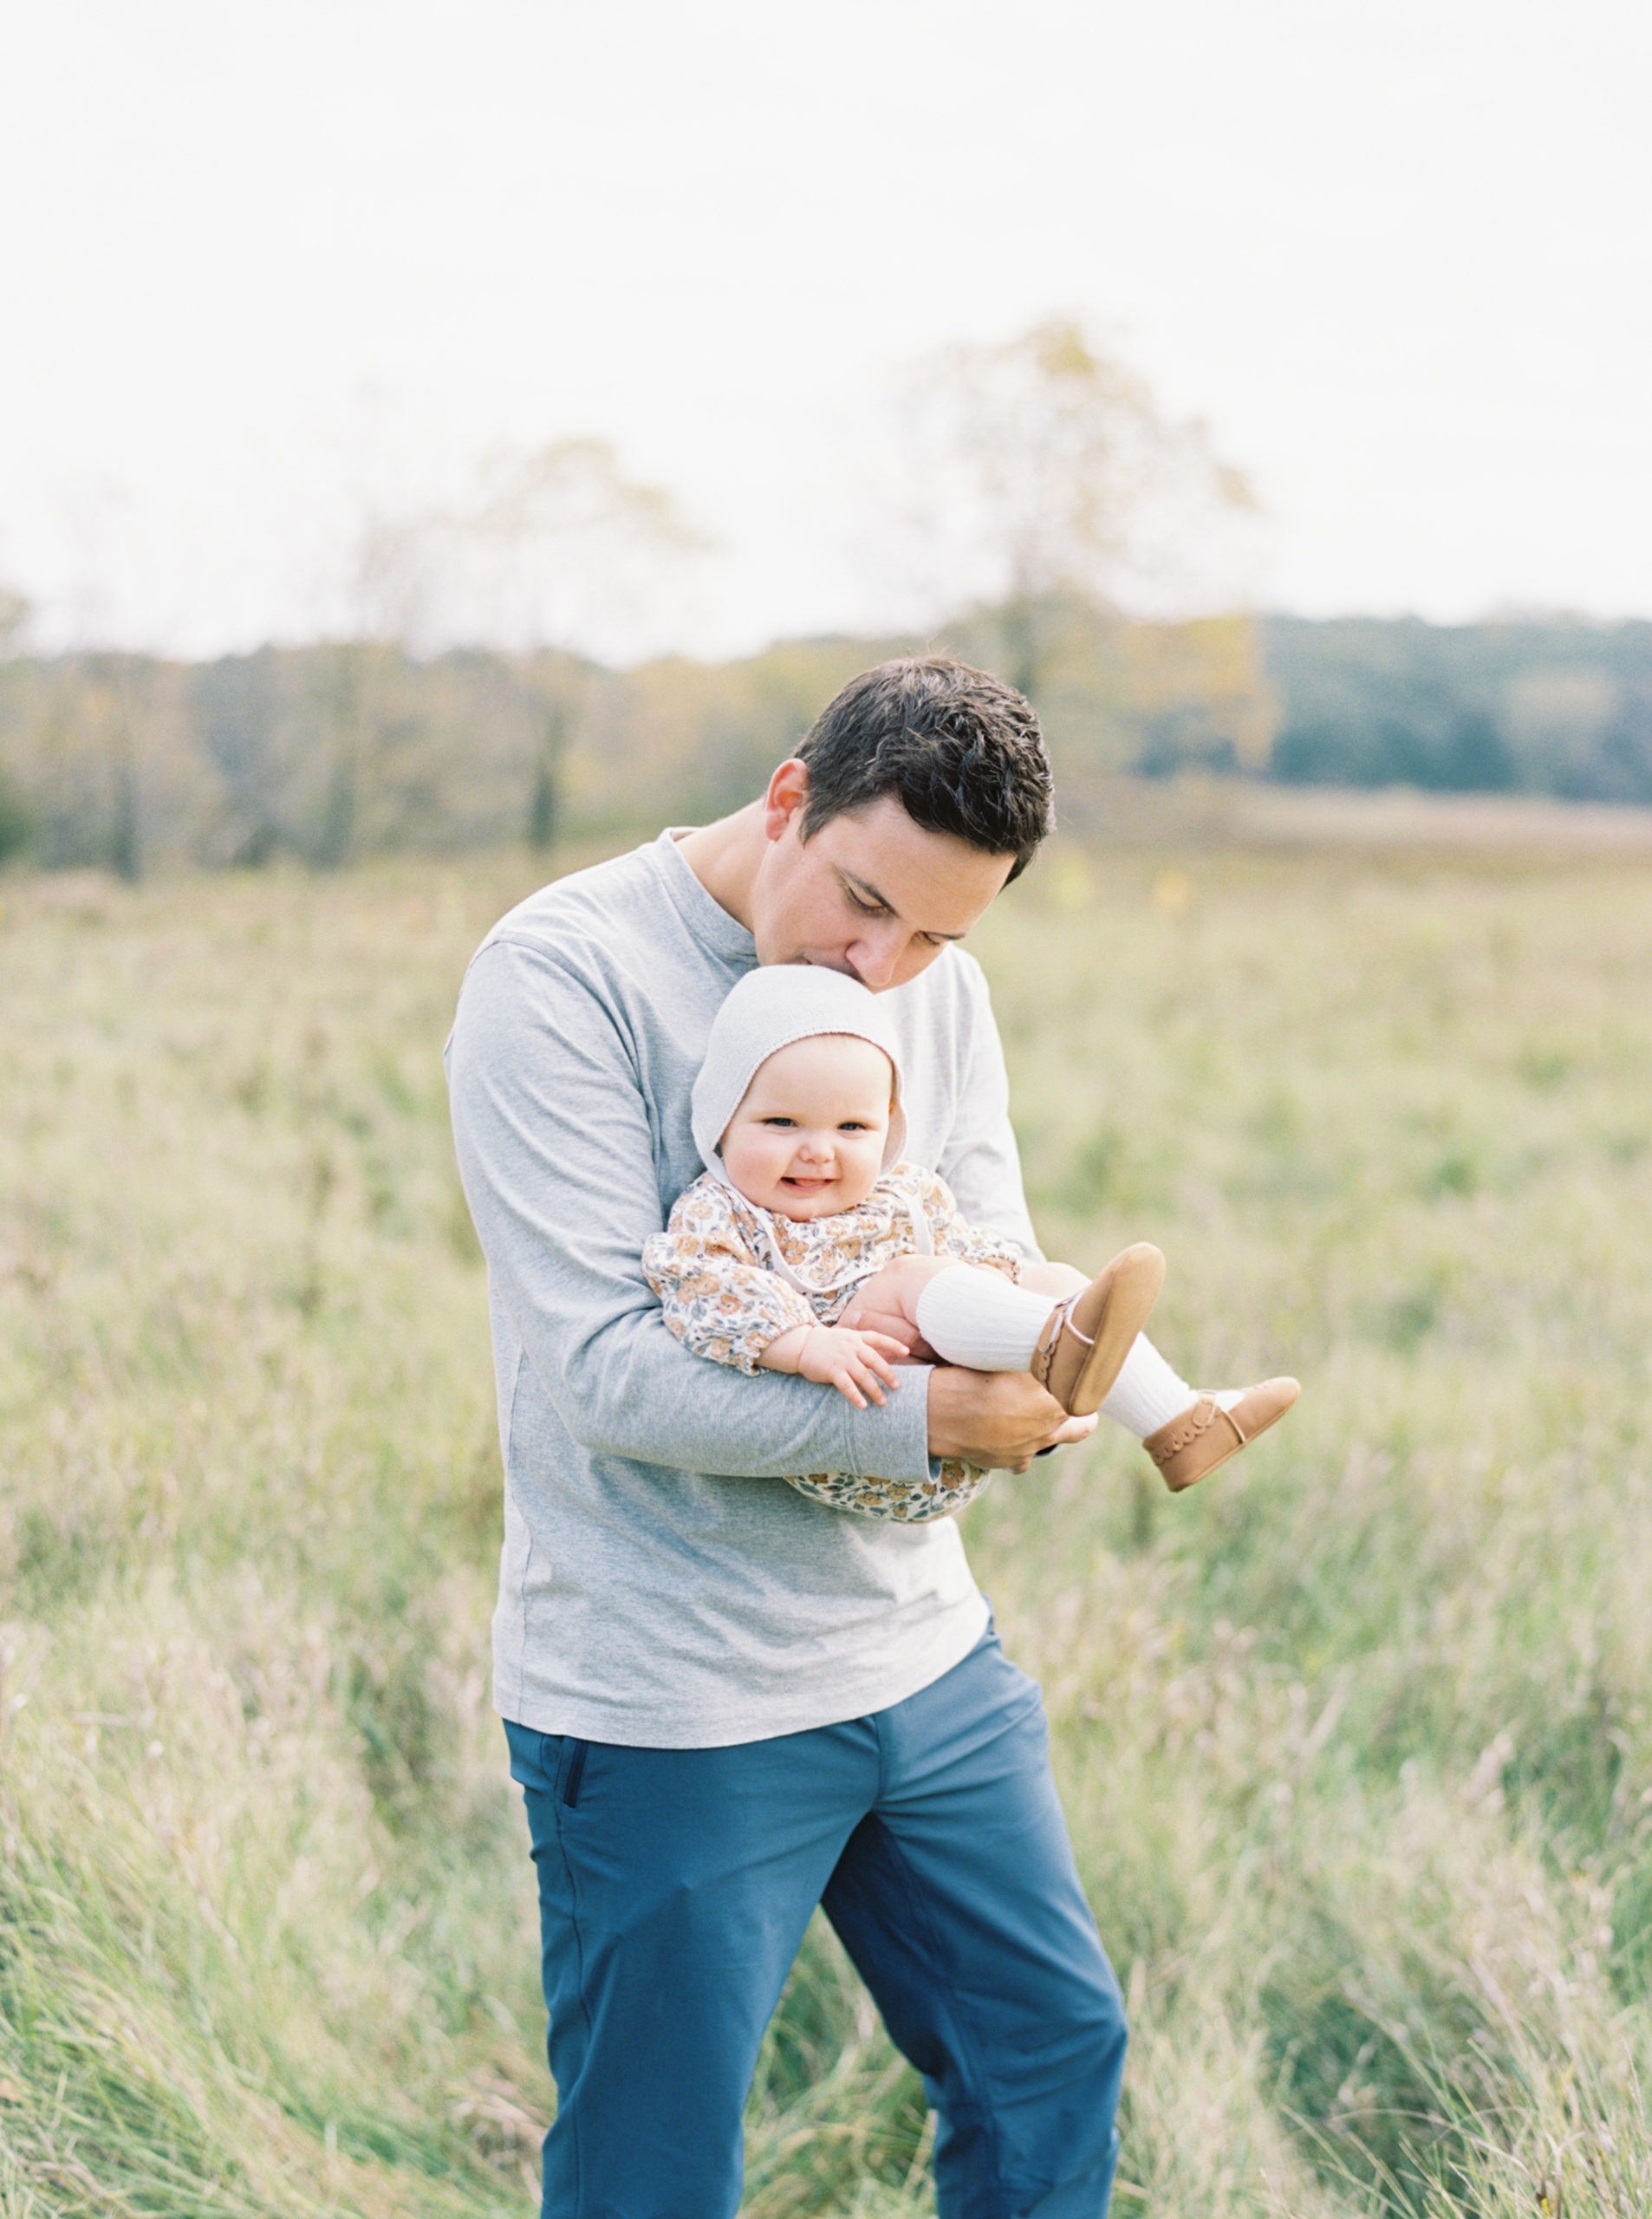 A father cuddles his baby in a grassy Hartland field on a beautiful Fall afternoon